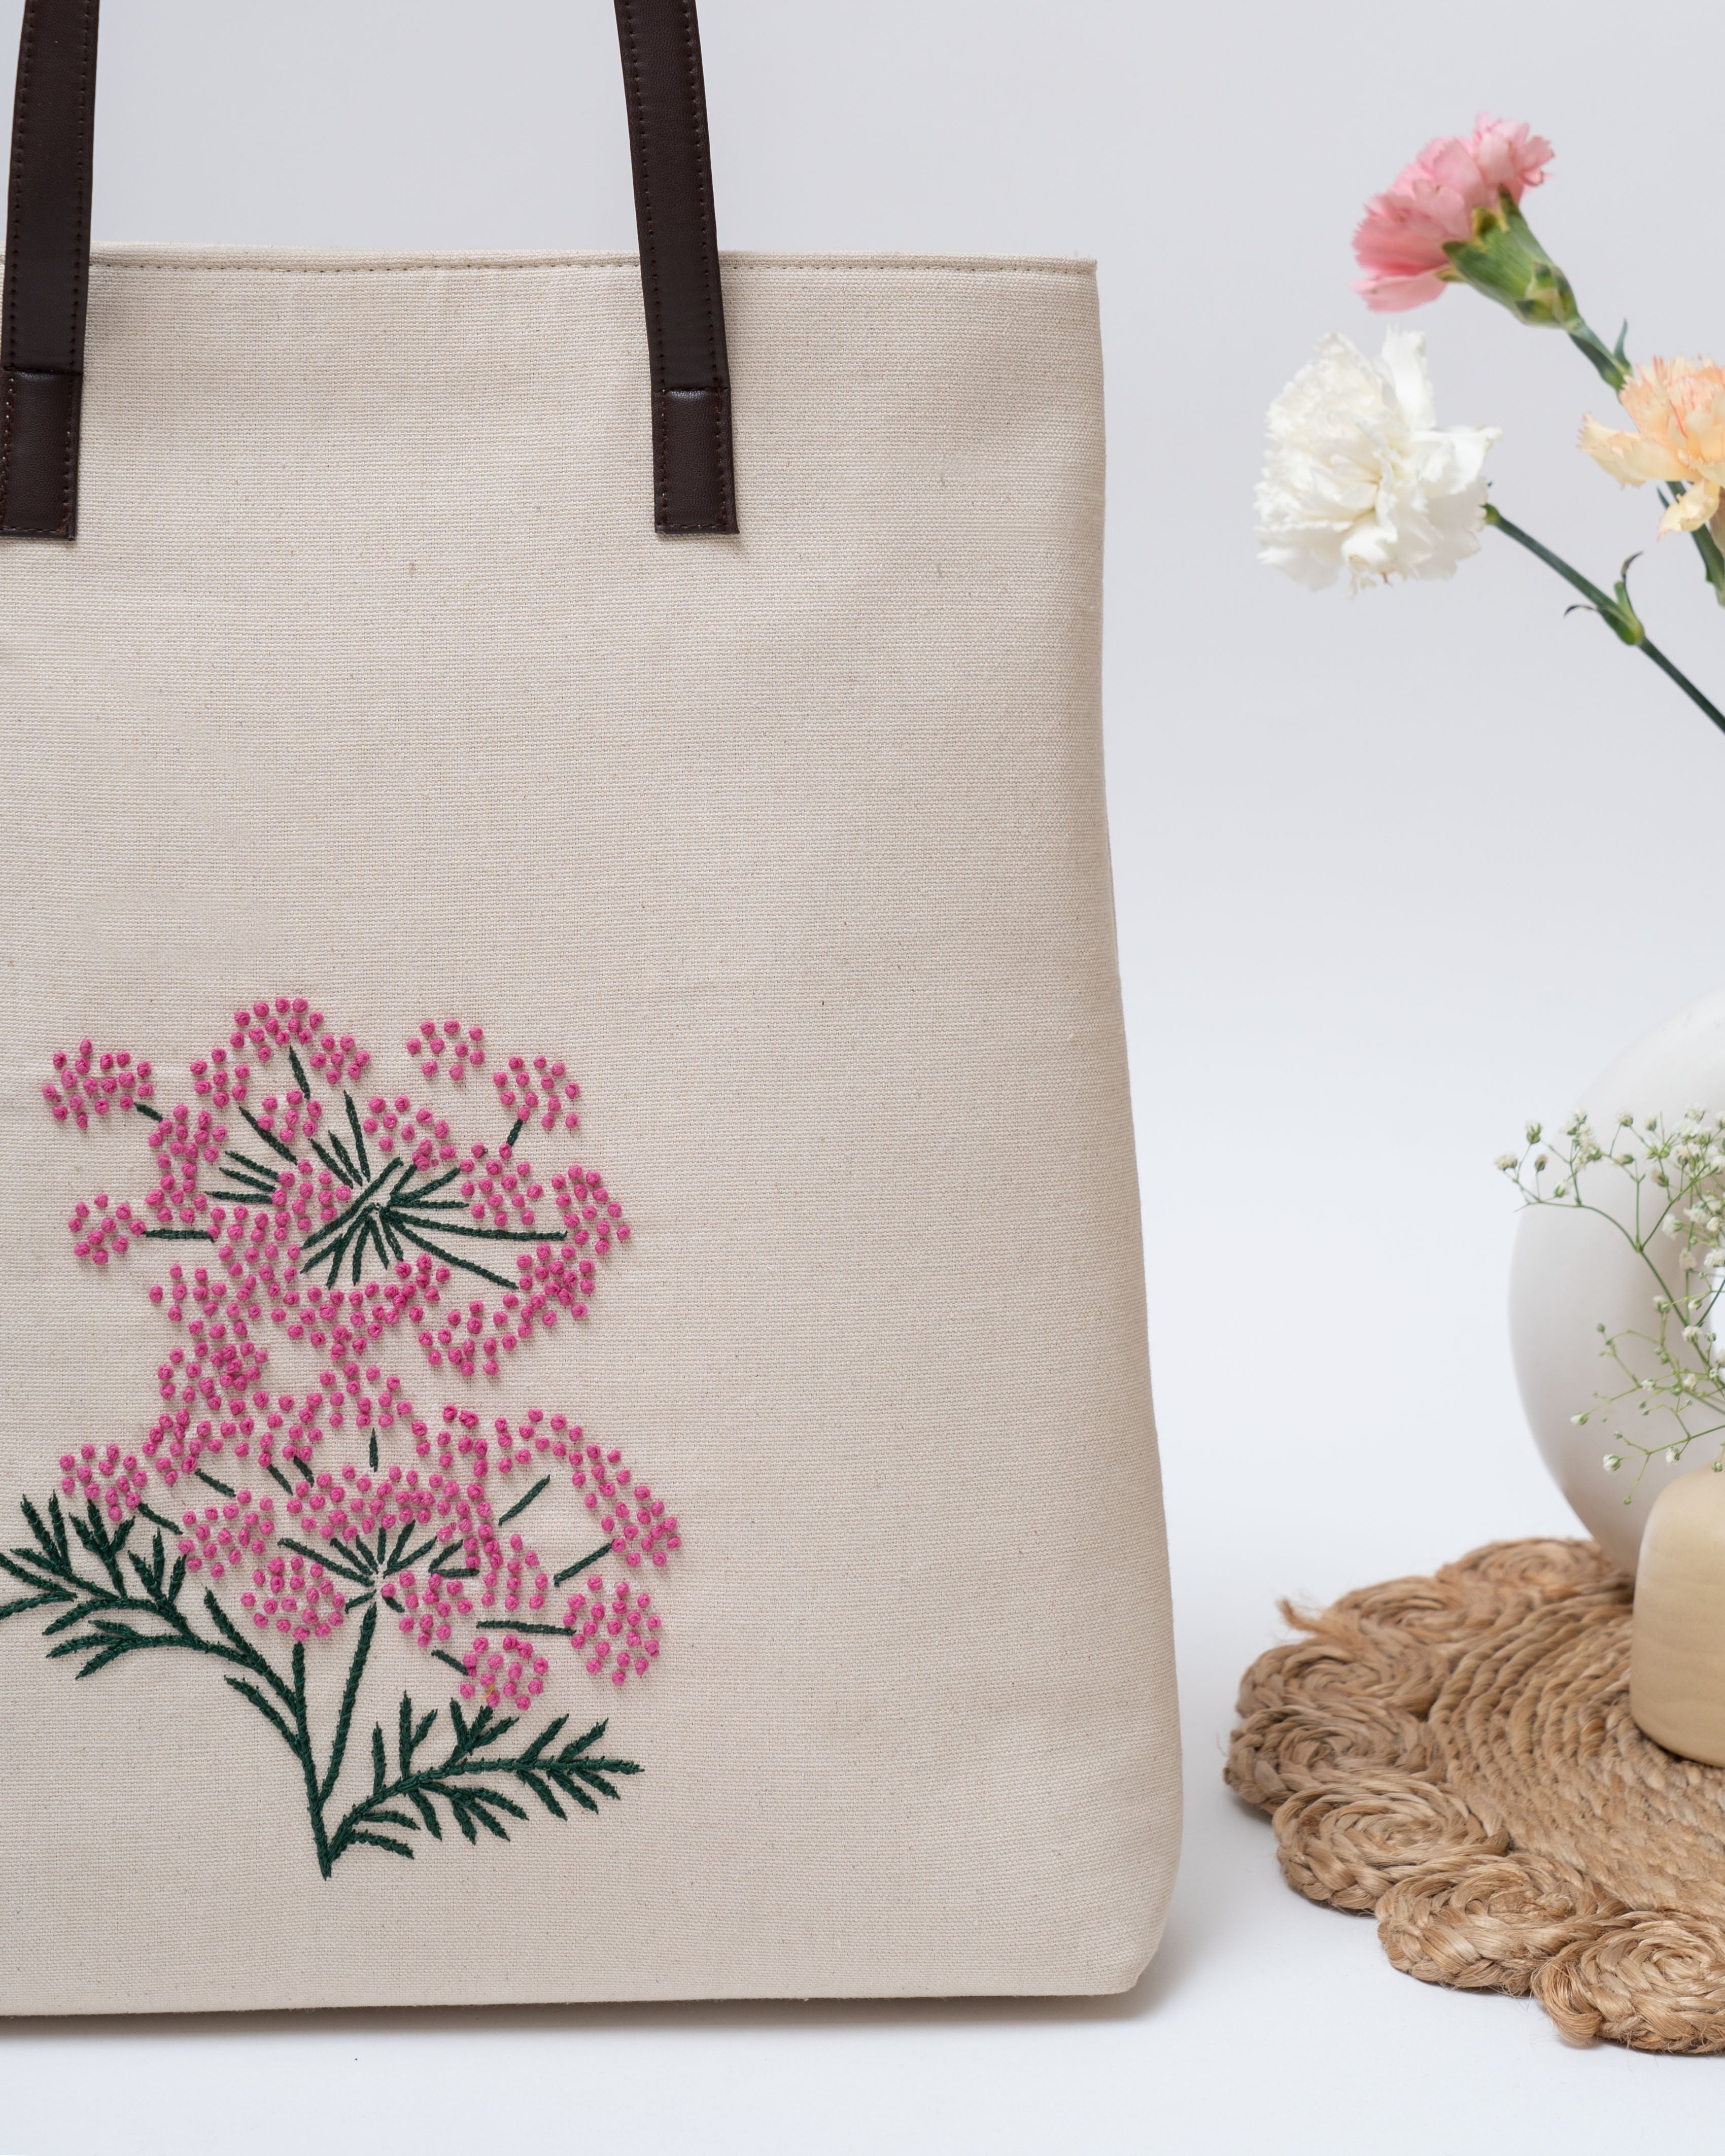 Branches Of Love Tote Bag